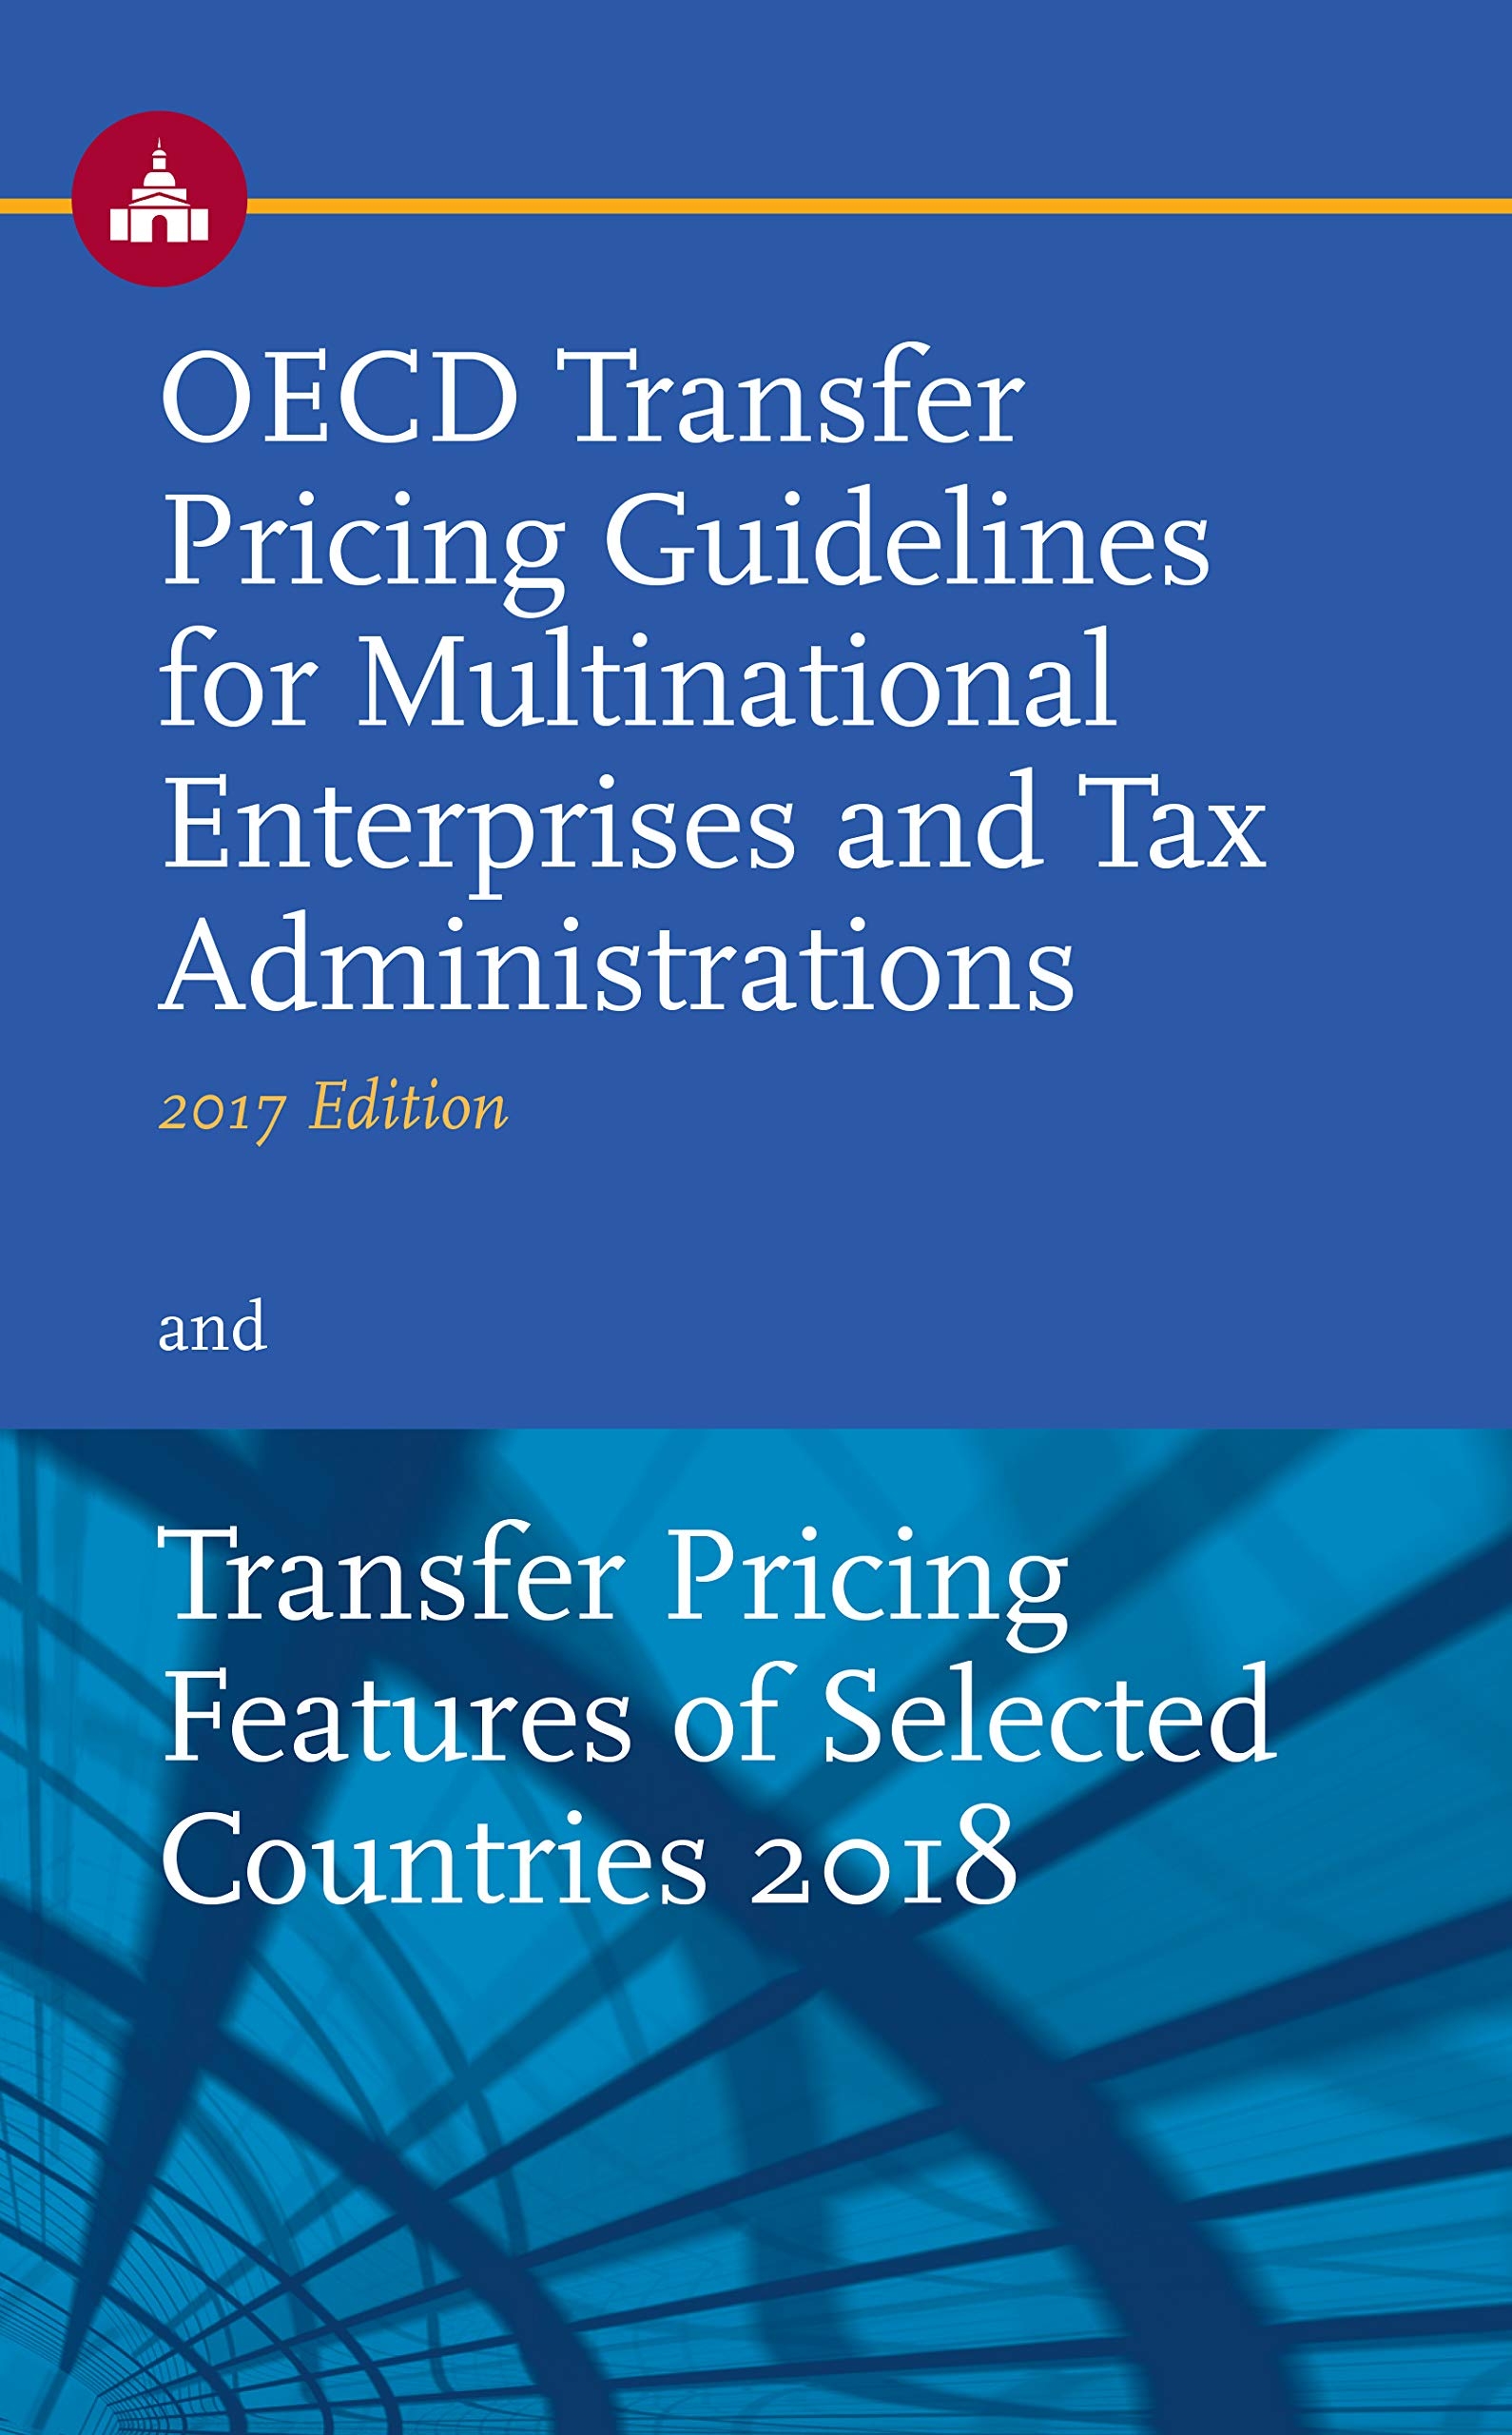 OECD TP Guidelines for Multinational Enterprises and Tax Administrations and TP Features of Selected Countries 2017 - Including Luxembourg Transfer Pricing Features